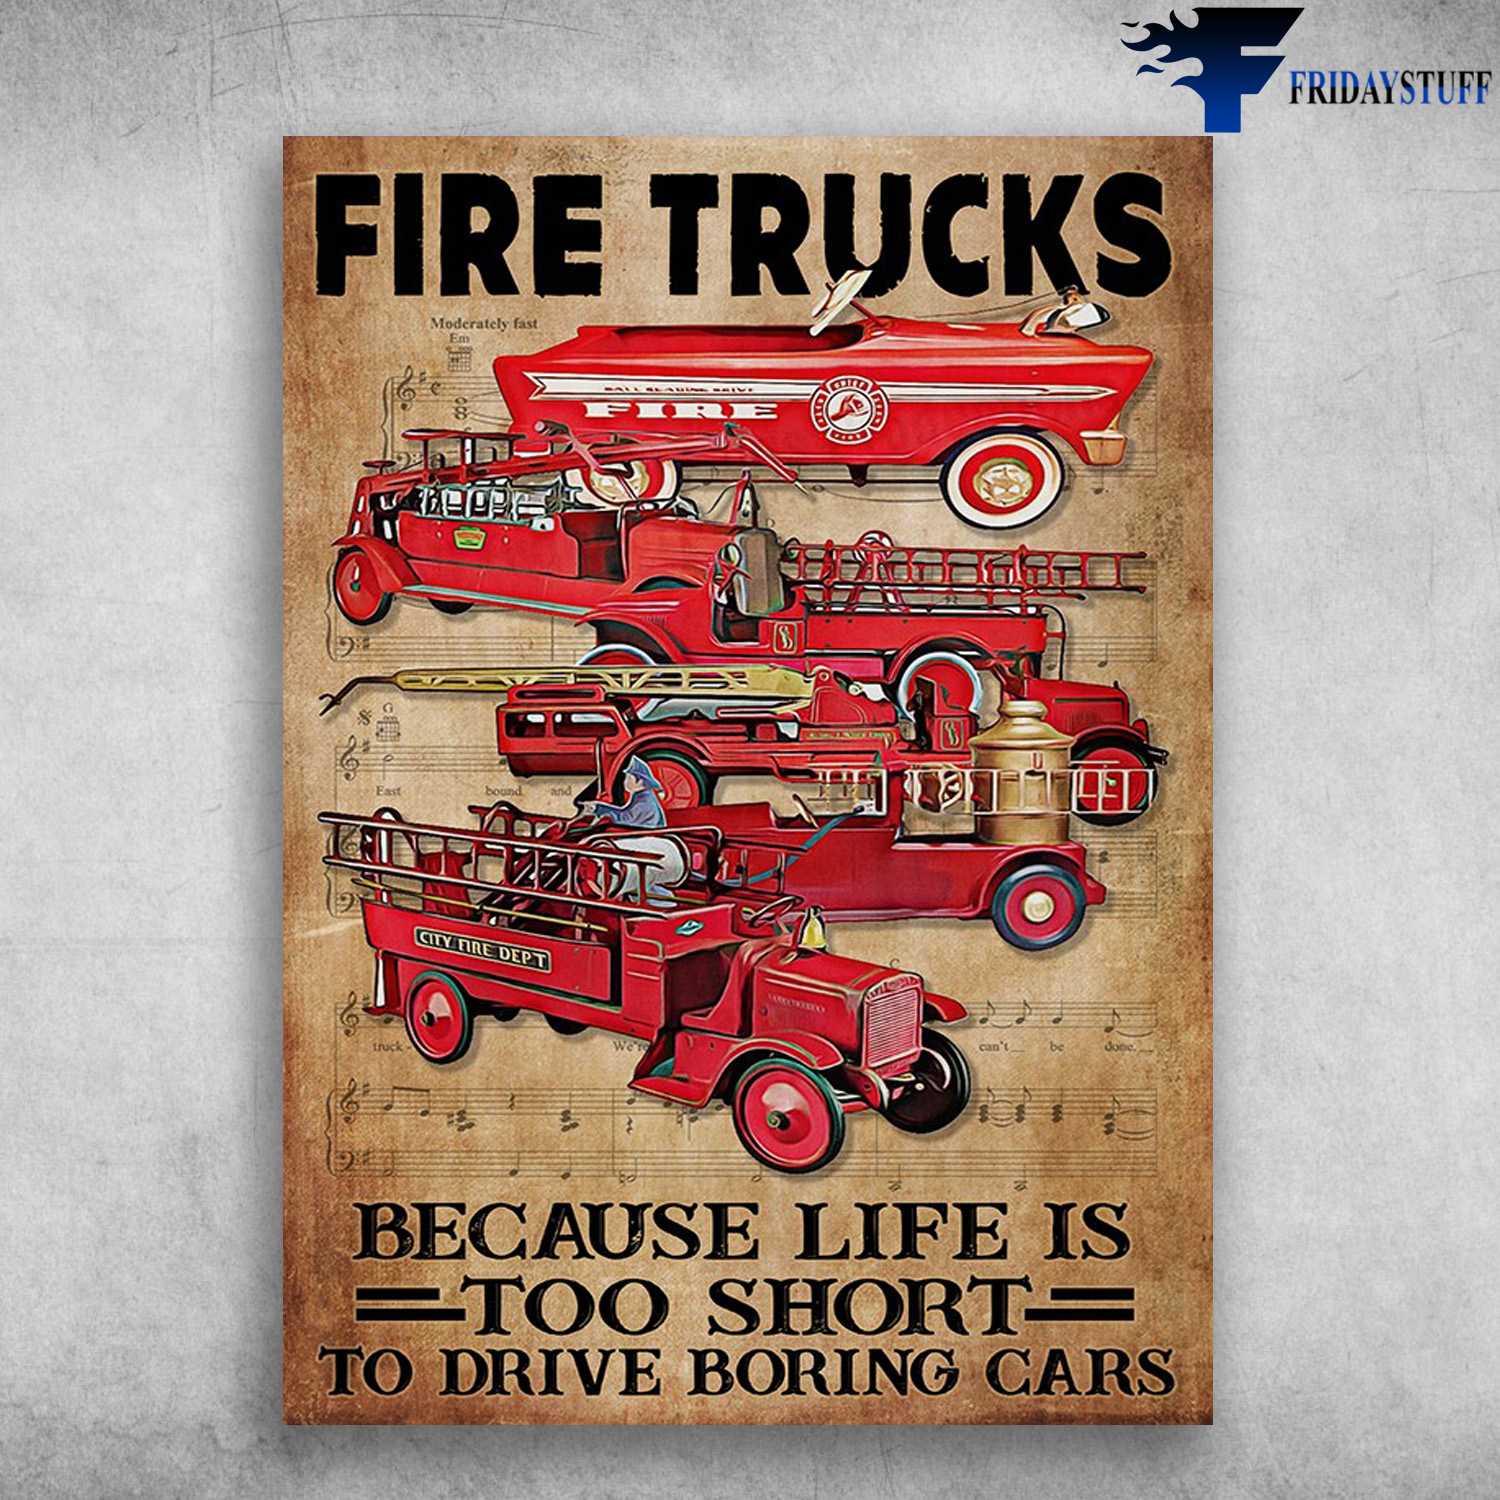 Fire Trucks, Firefighter Poster - Because Life Is Too Short, To Drive Boring Cars